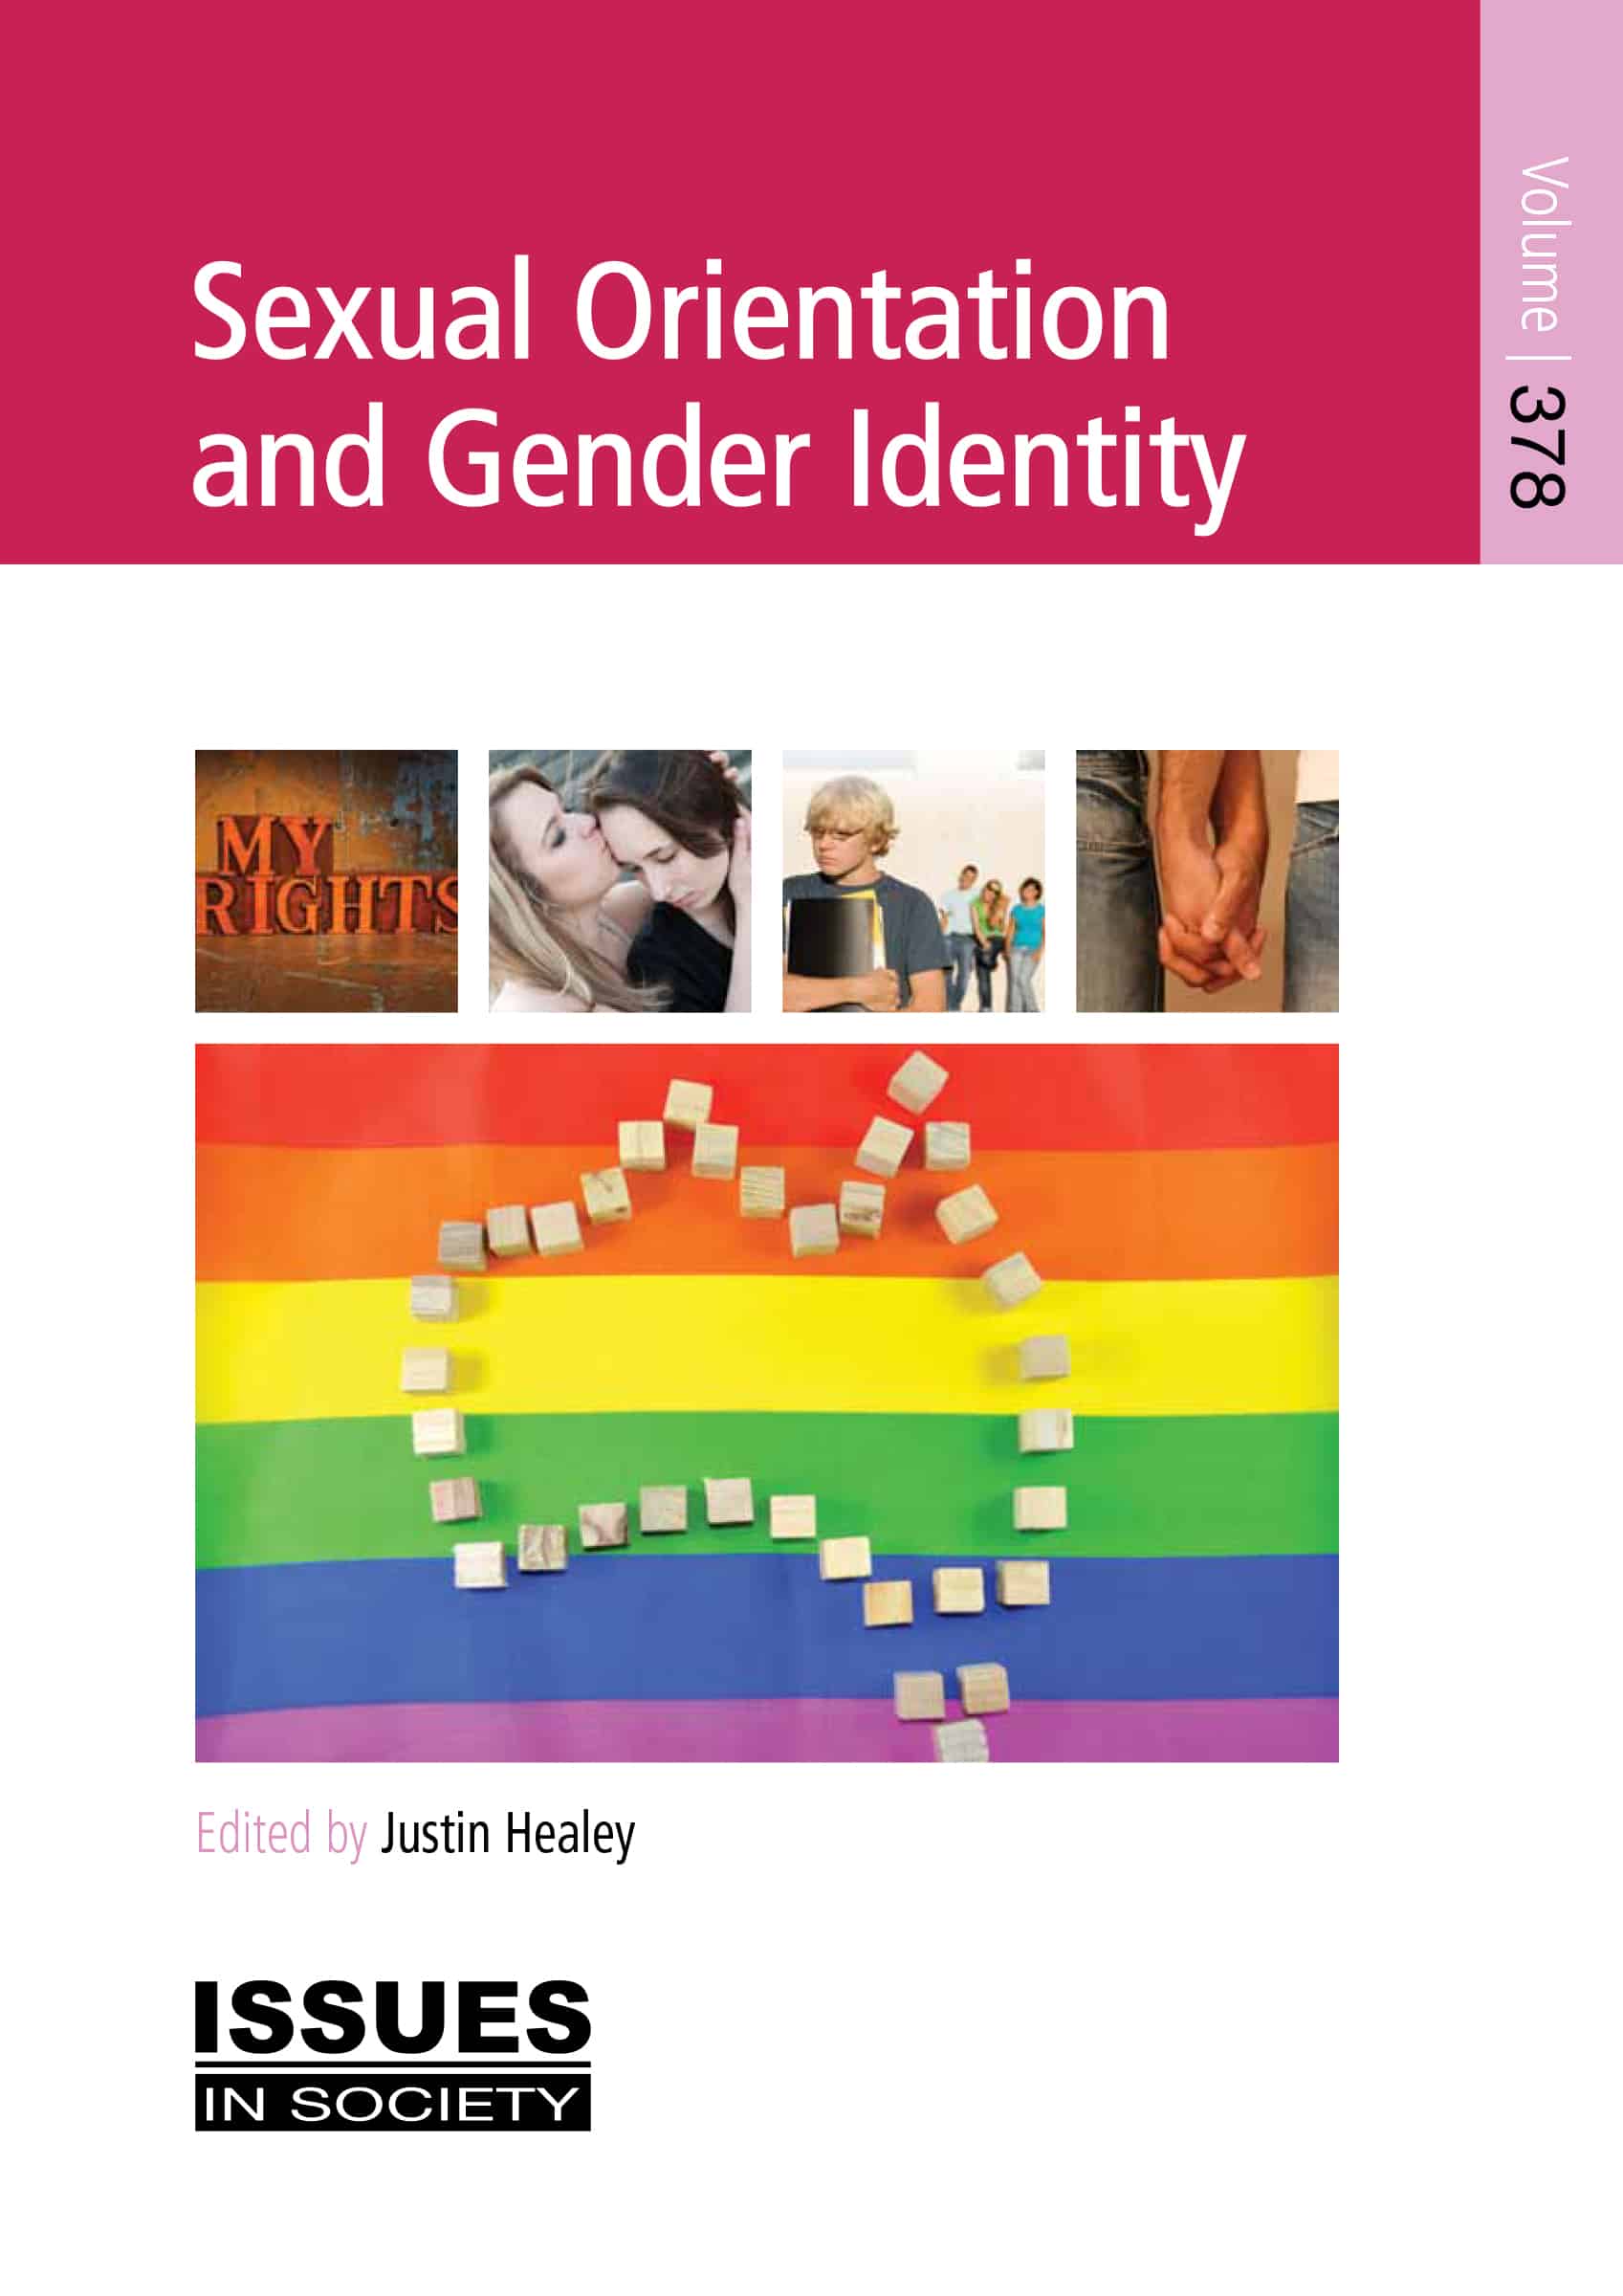 Exploring Gender Identity And Expression Book Displays Research